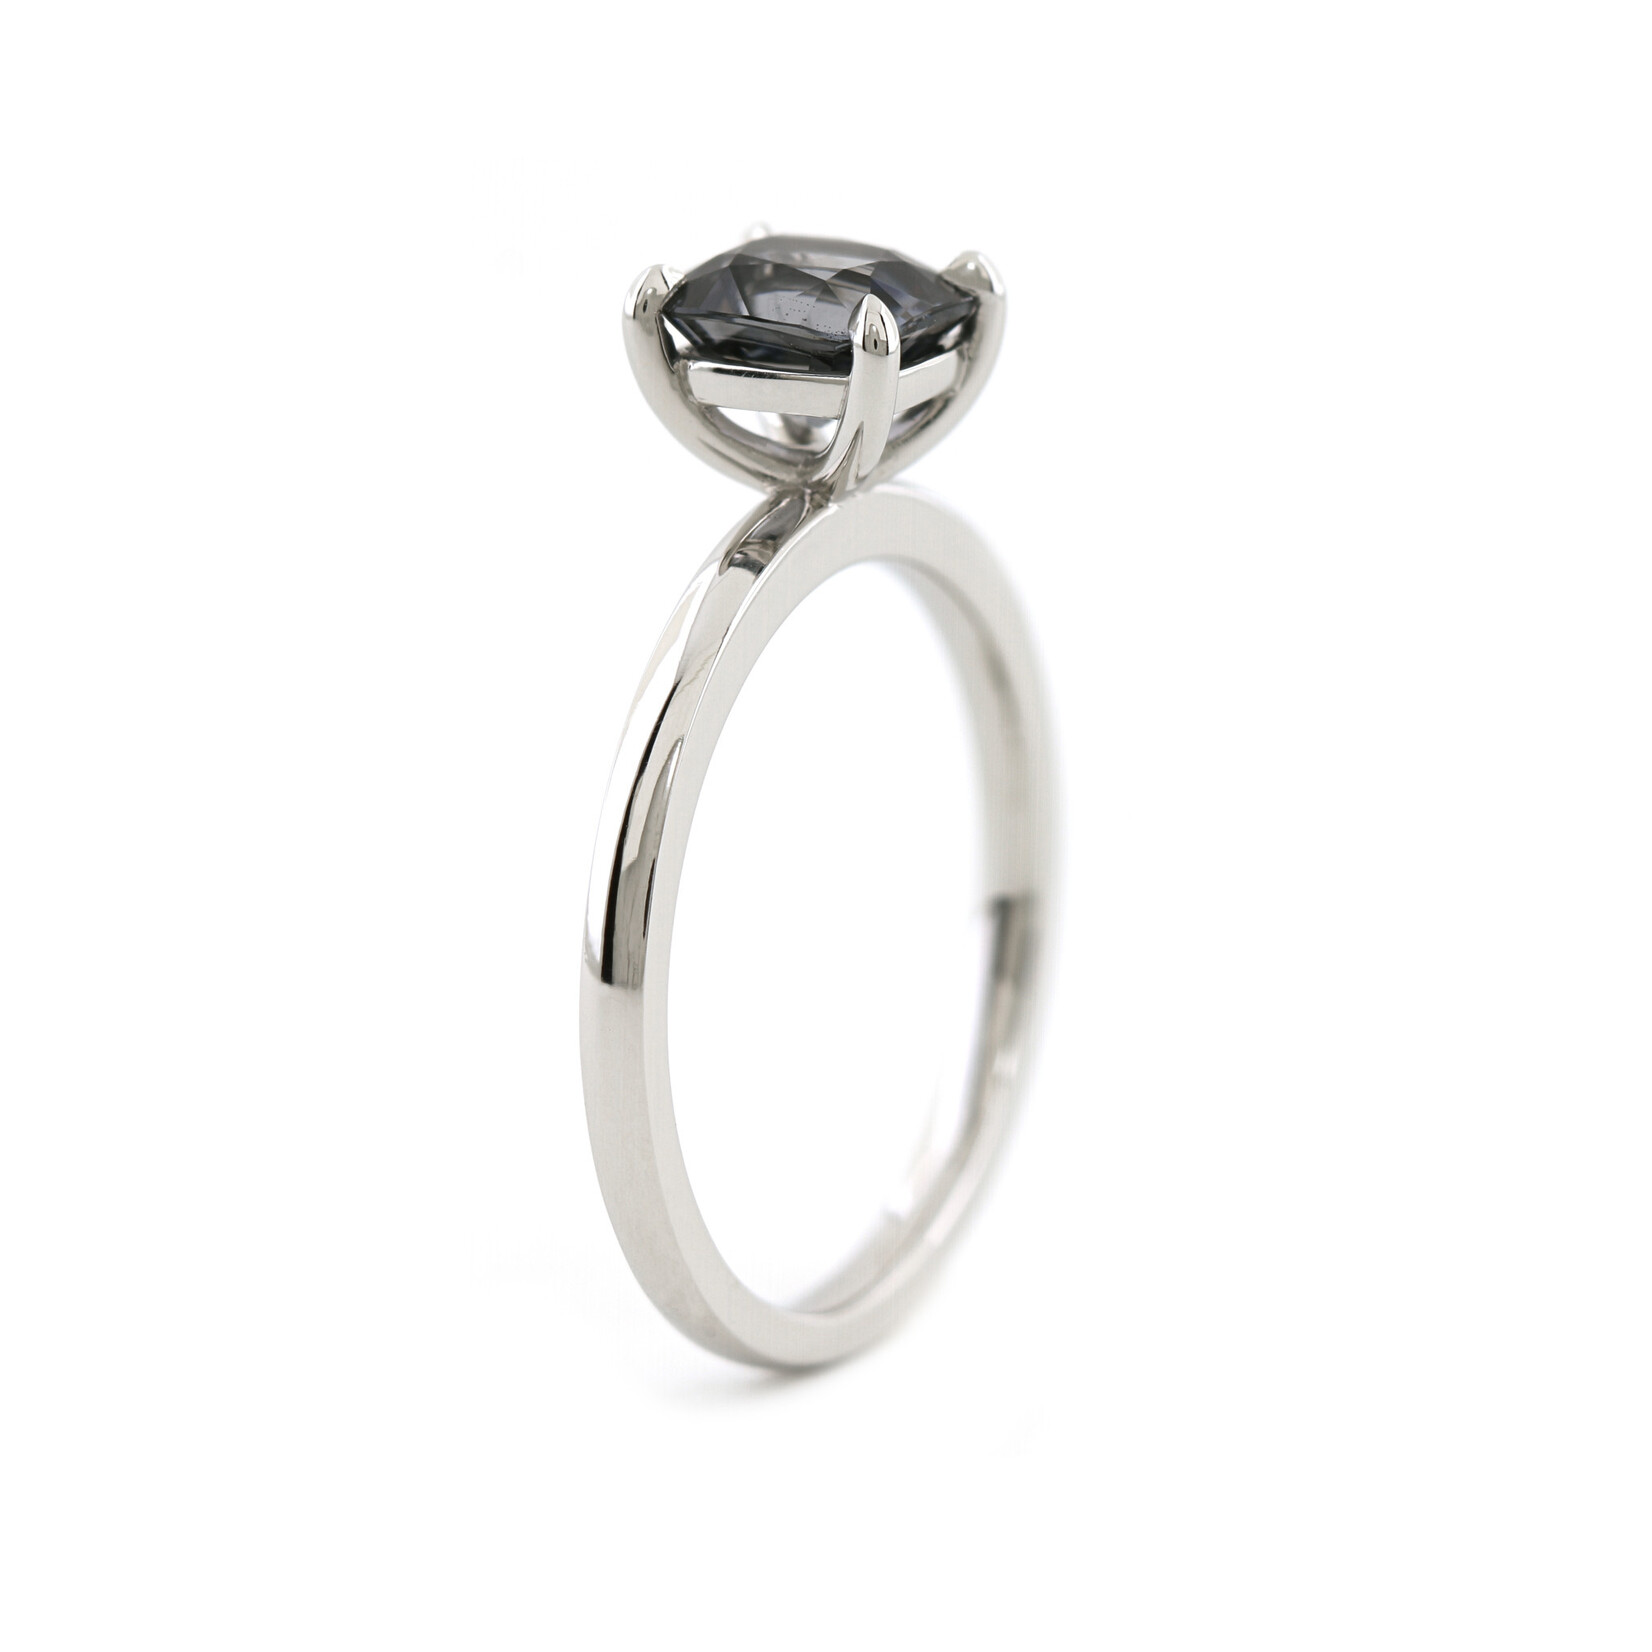 Baxter Moerman Chelsea Ring with Grey Spinel